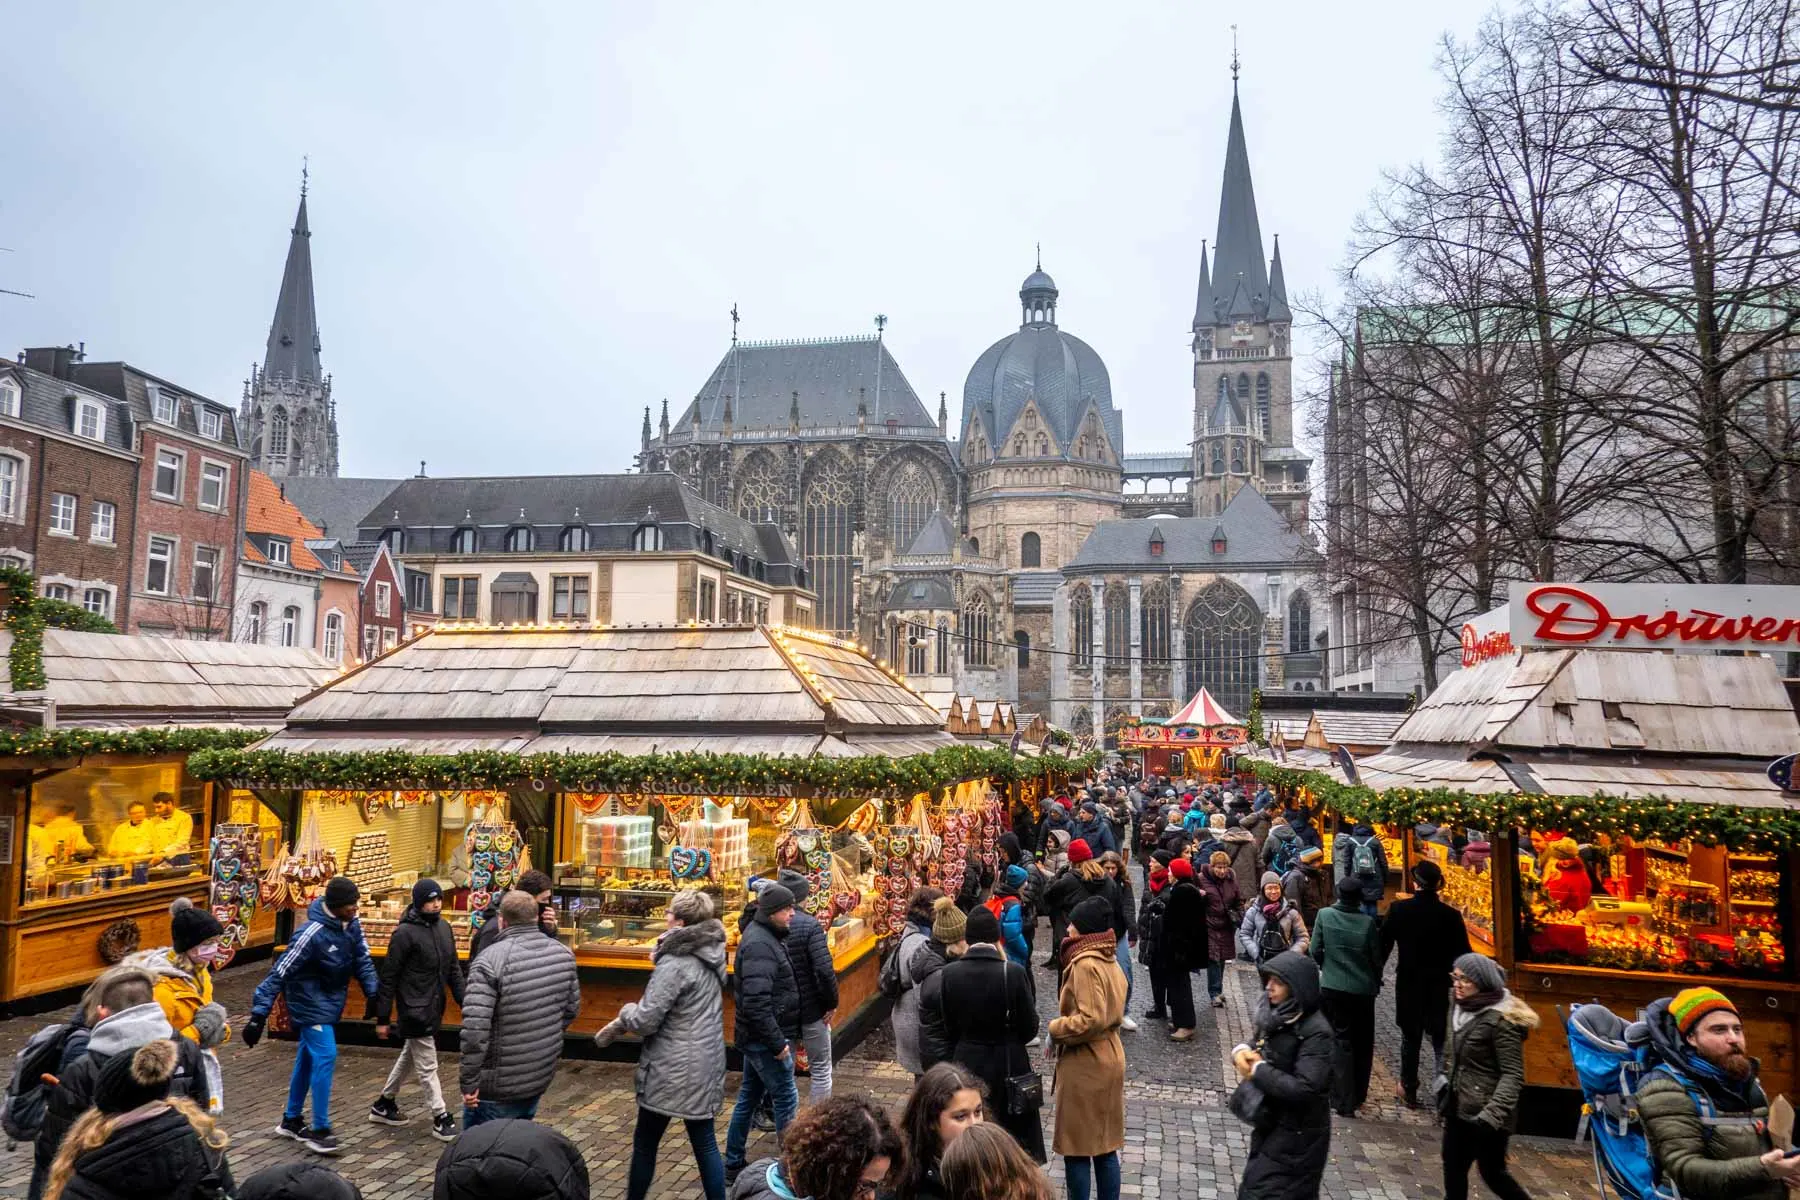 People shopping at a Christmas market with a cathedral in the background